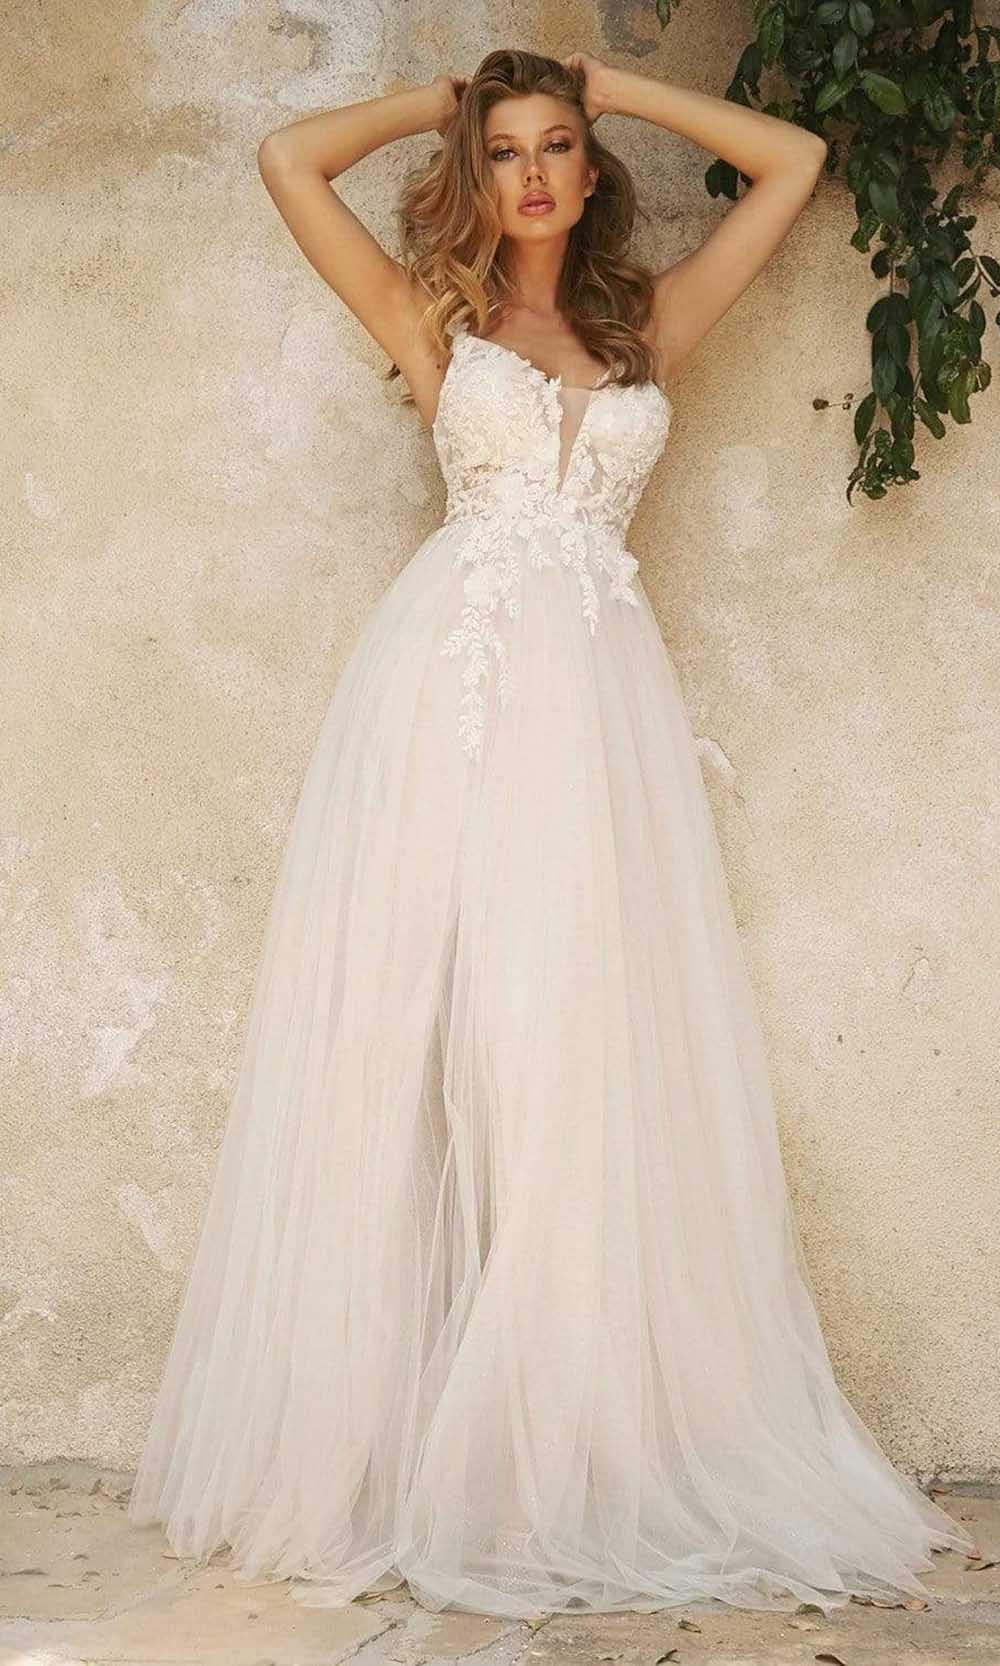 Image of Ladivine Bridal - CB072W Sleeveless Layered Tulle Gown